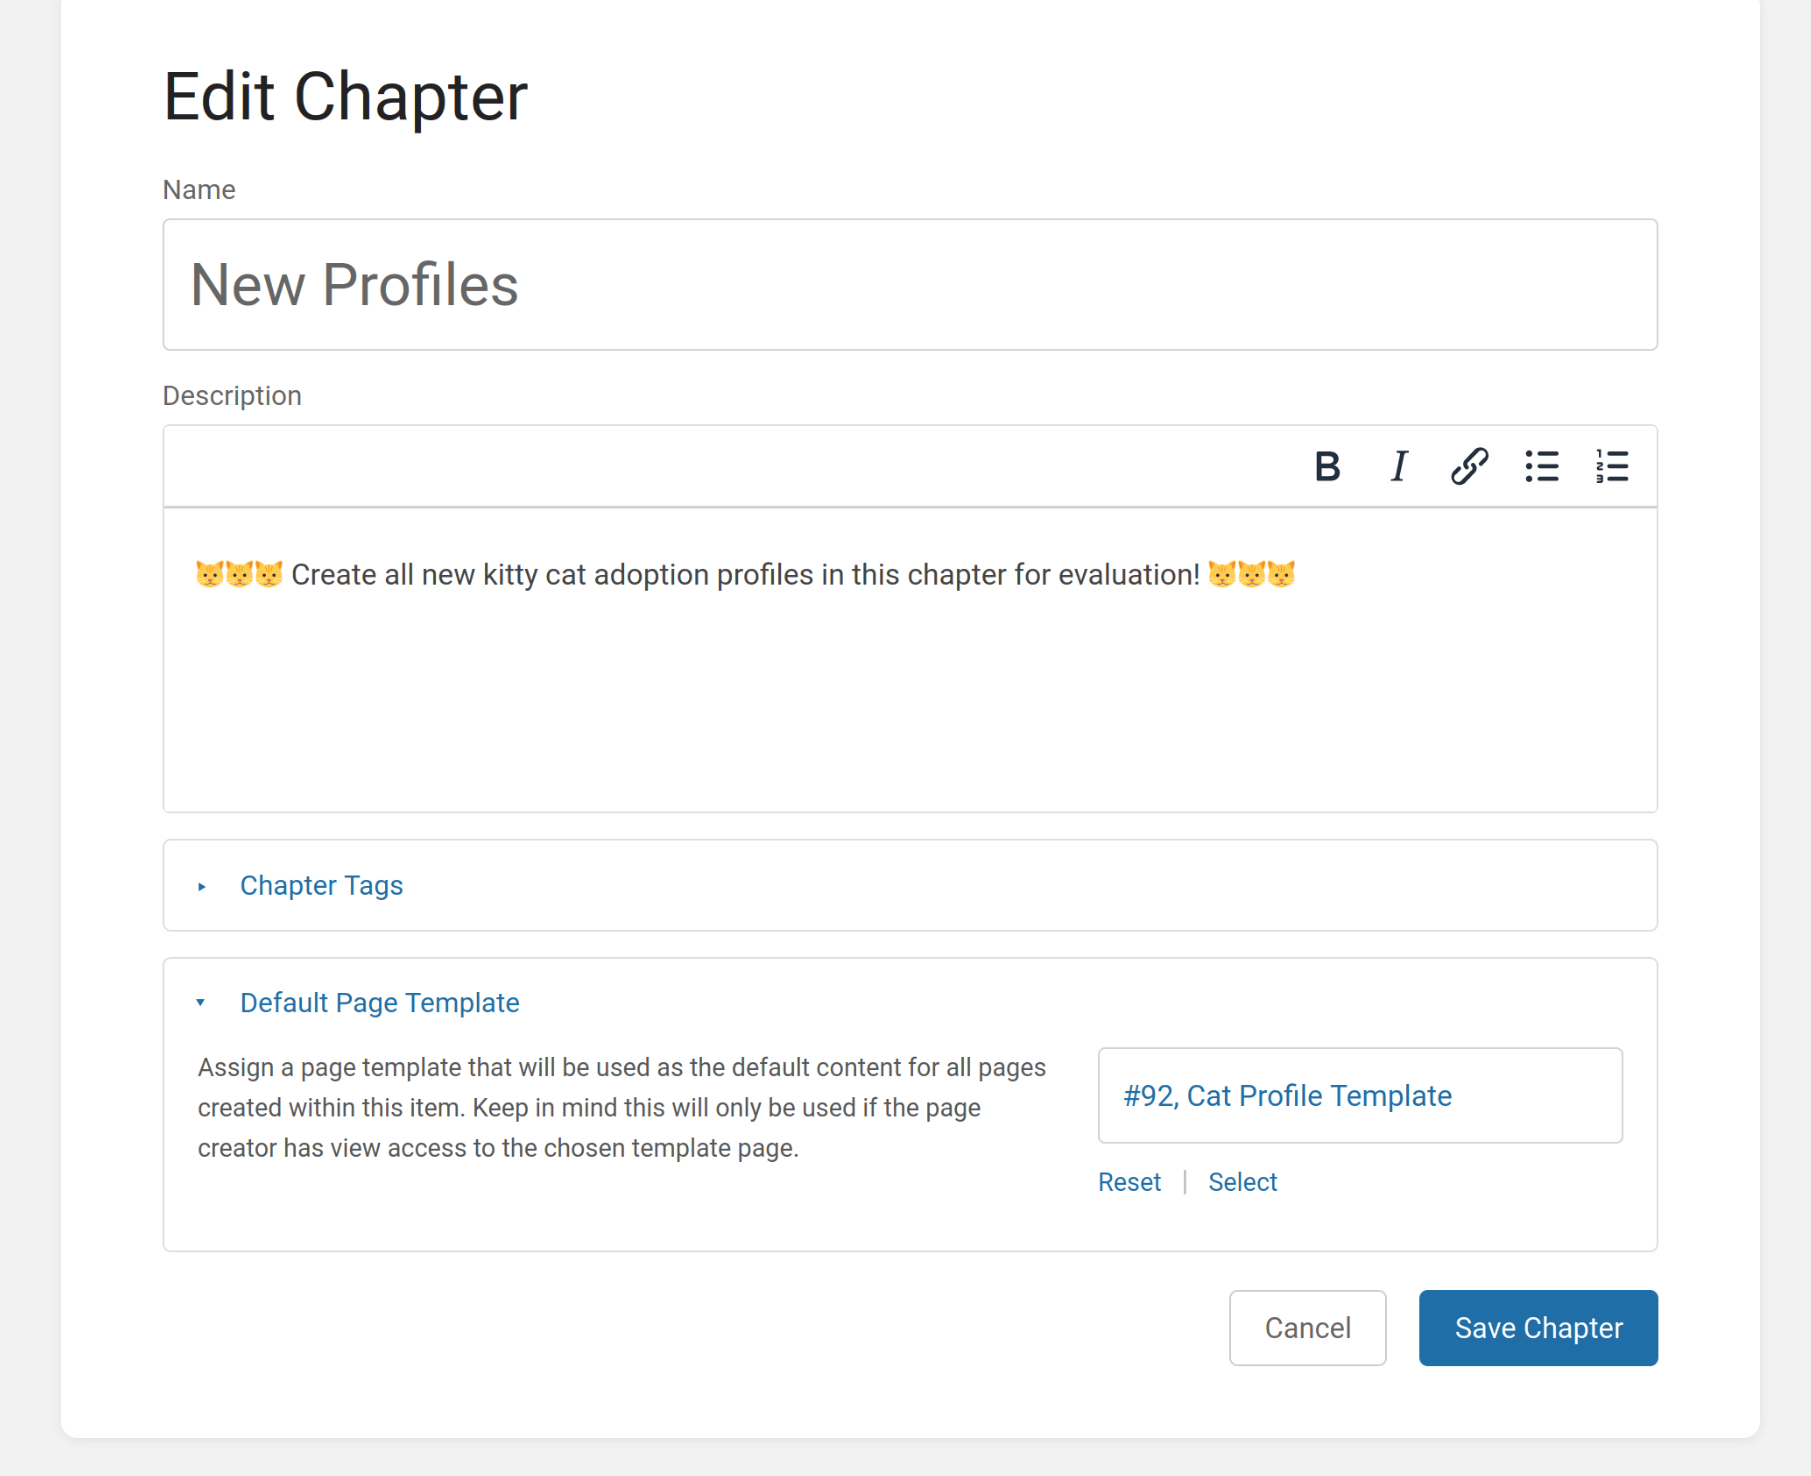 View of the &ldquo;Edit Chapter&rdquo; page in BookStack, focused on a &ldquo;Default Page Template&rdquo; section containing an input that shows the value &ldquo;#92, Cat Profile Template&rdquo;